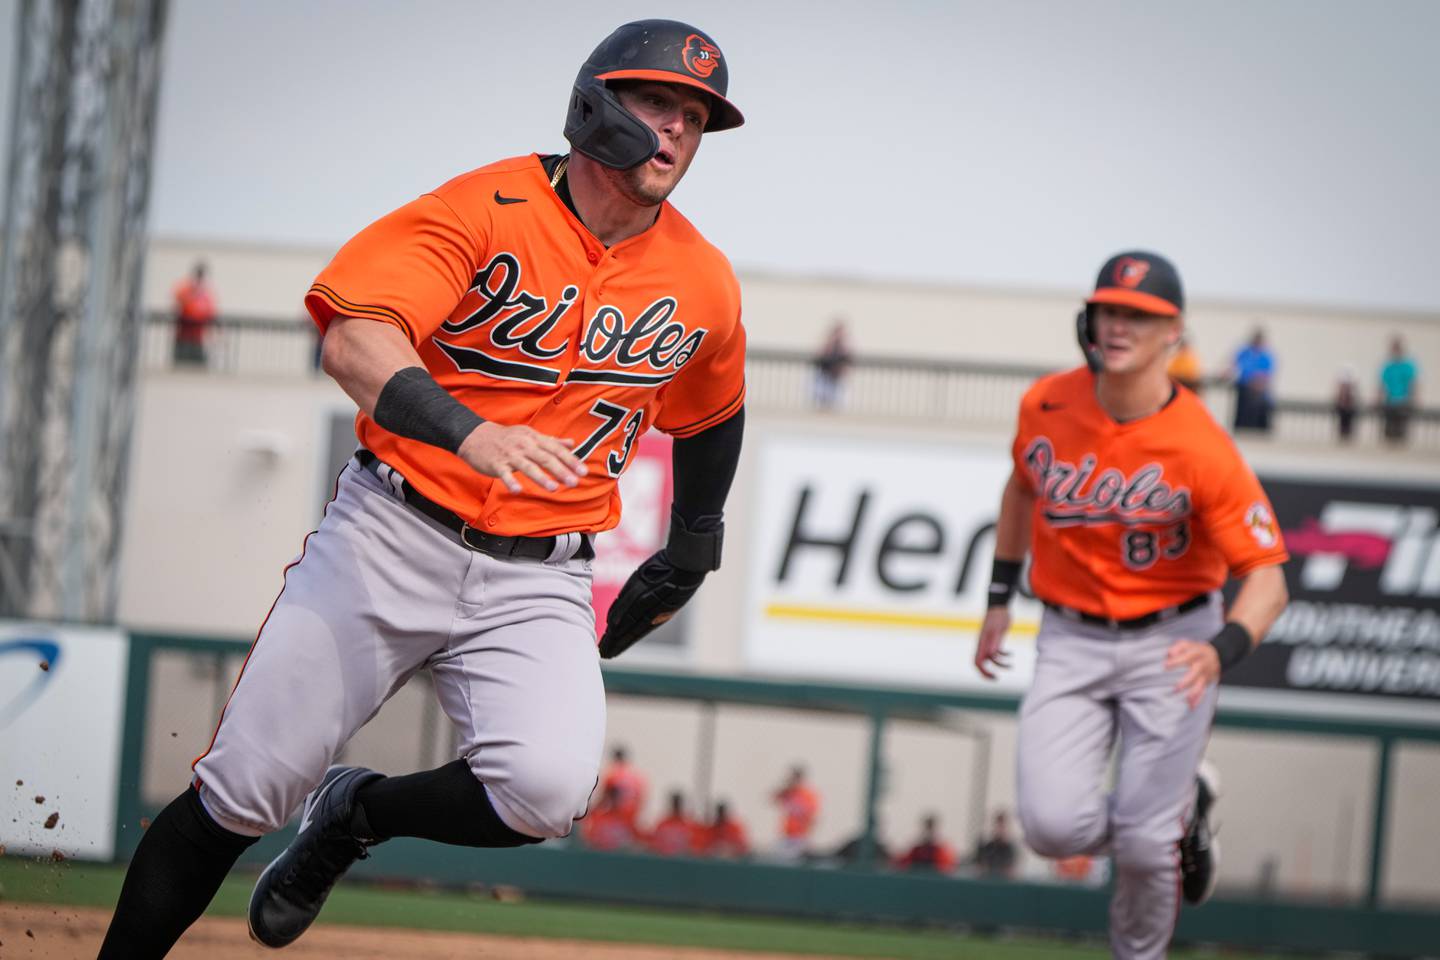 César Prieto (73) runs to home plate, followed by Kyle Stowers (83) behind him, on a double by Ryan O’Hearn in the sixth inning of a game against the Tigers on 3/2/23. The Baltimore Orioles lost to the Detroit Tigers, 10-3, in the Florida Grapefruit League matchup.